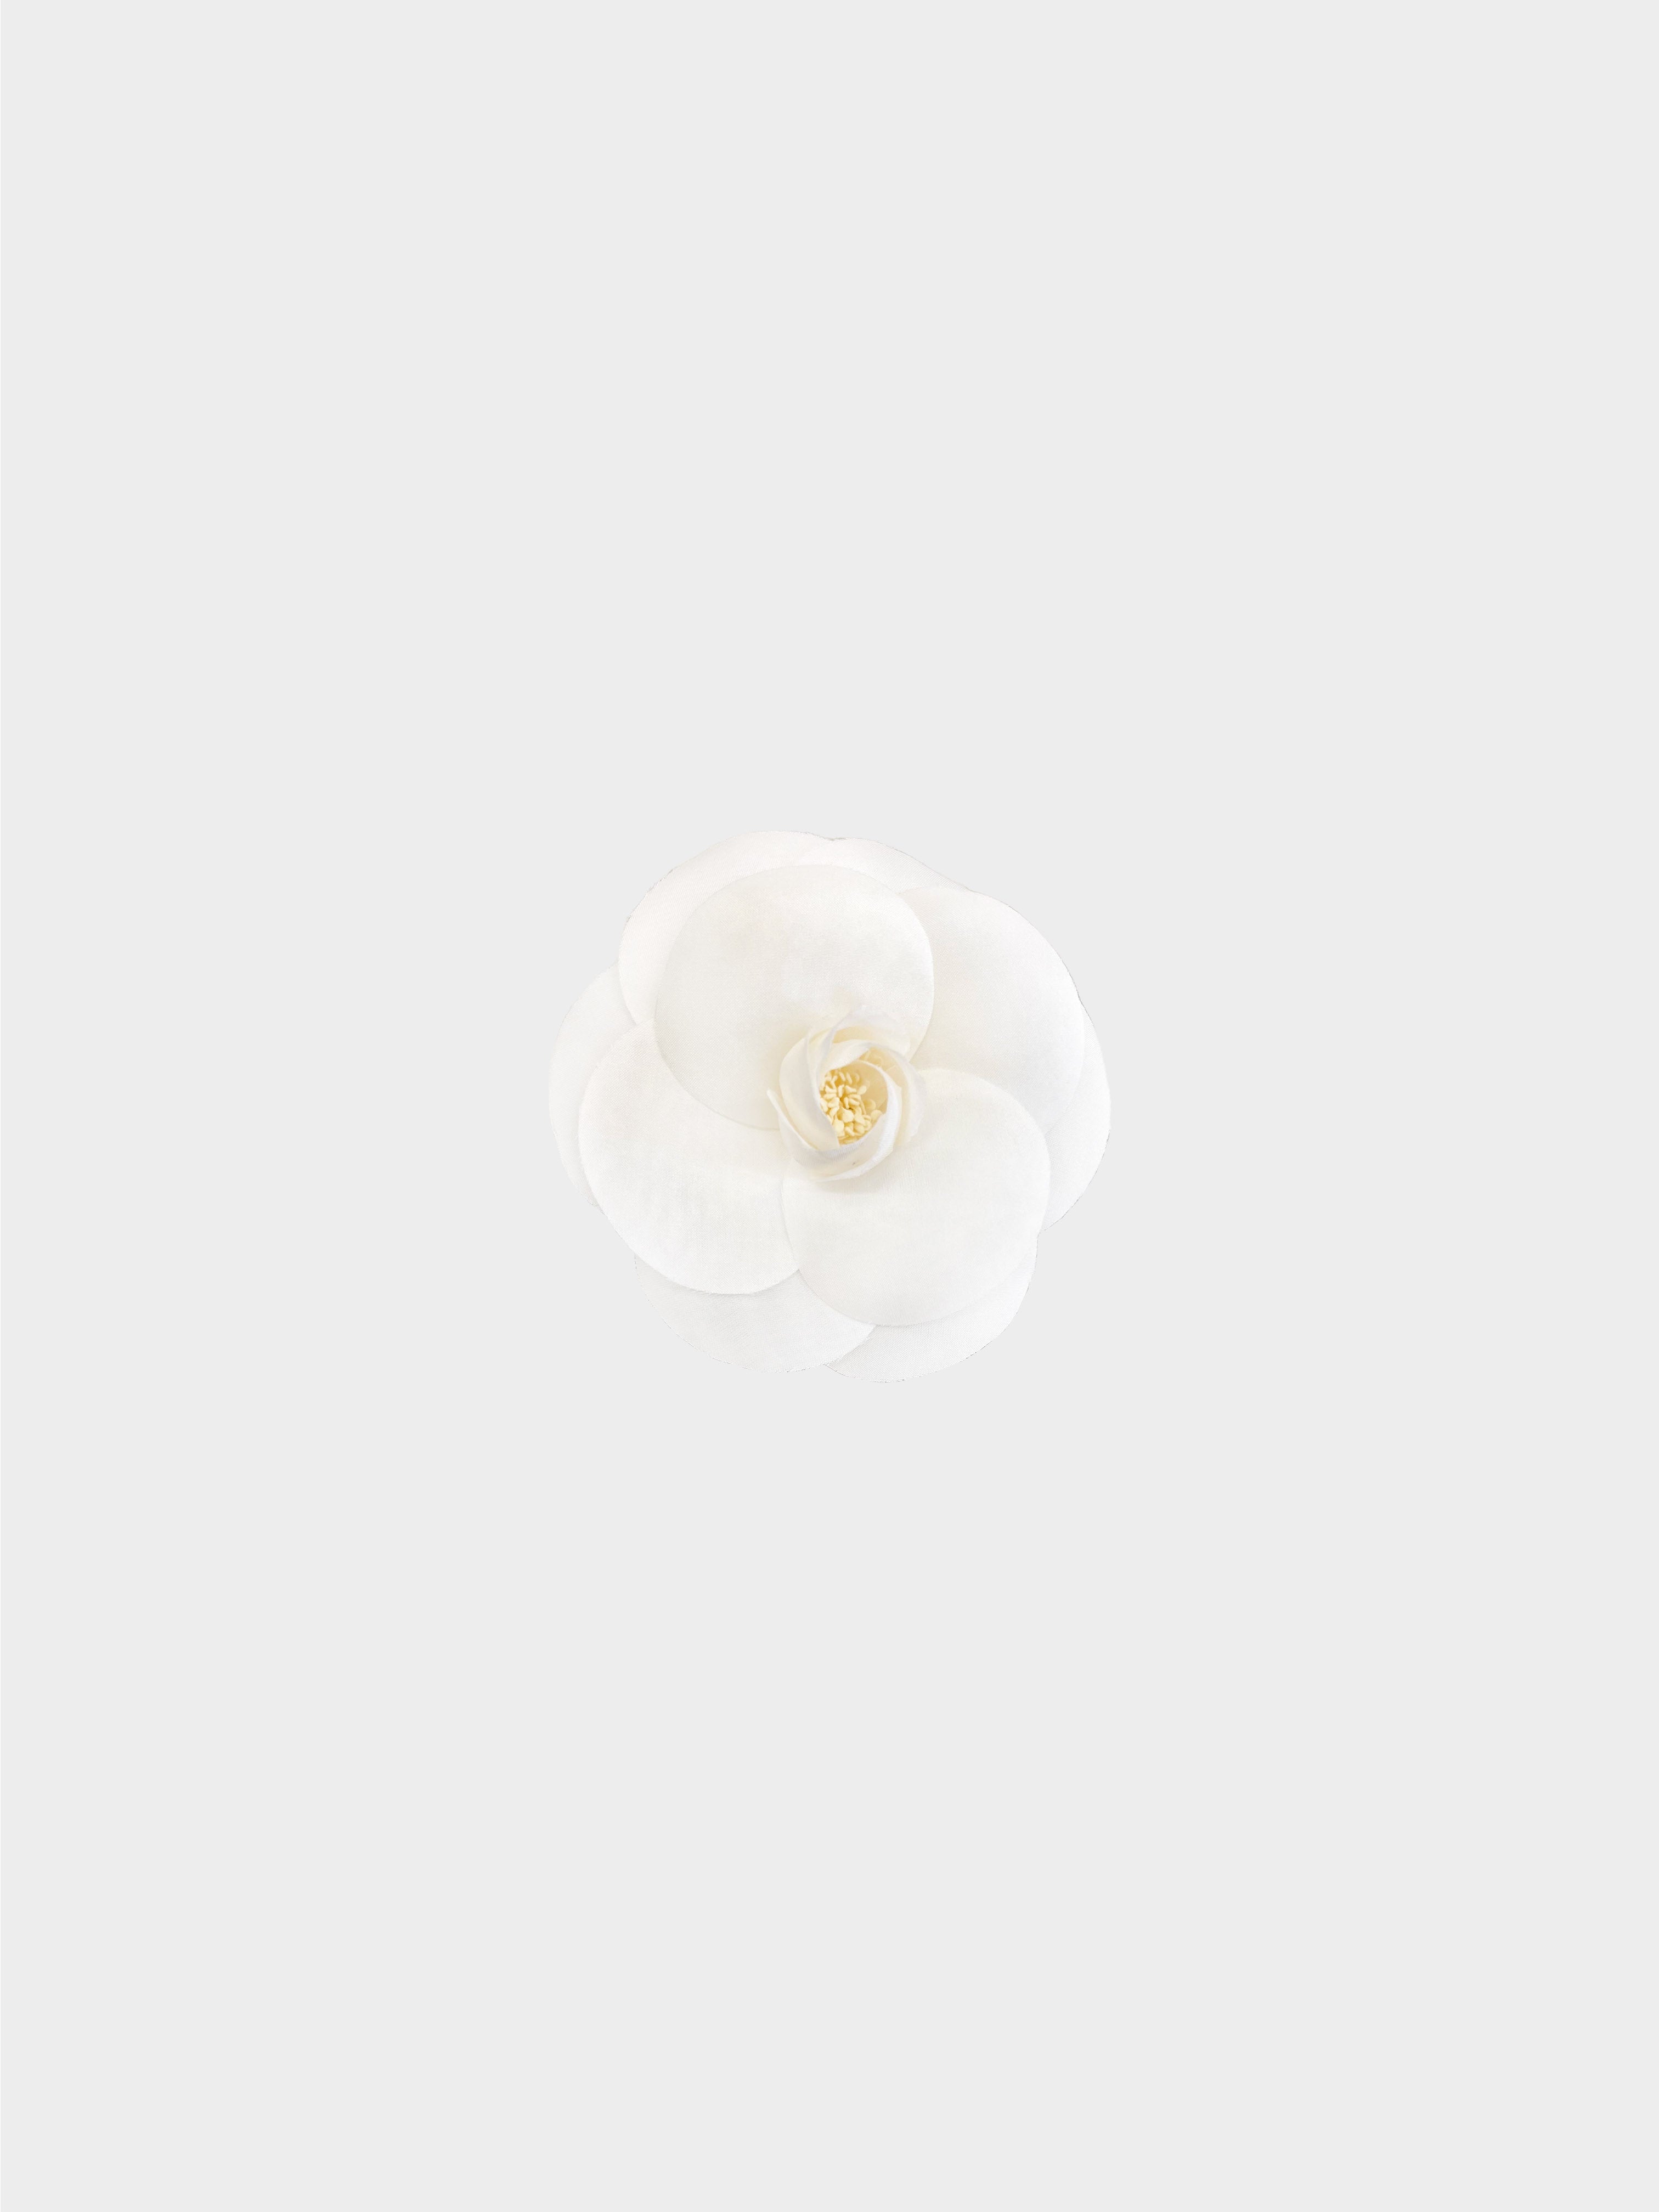 Chanel Style Enameled Camellia Flower Stick Pin Brooch